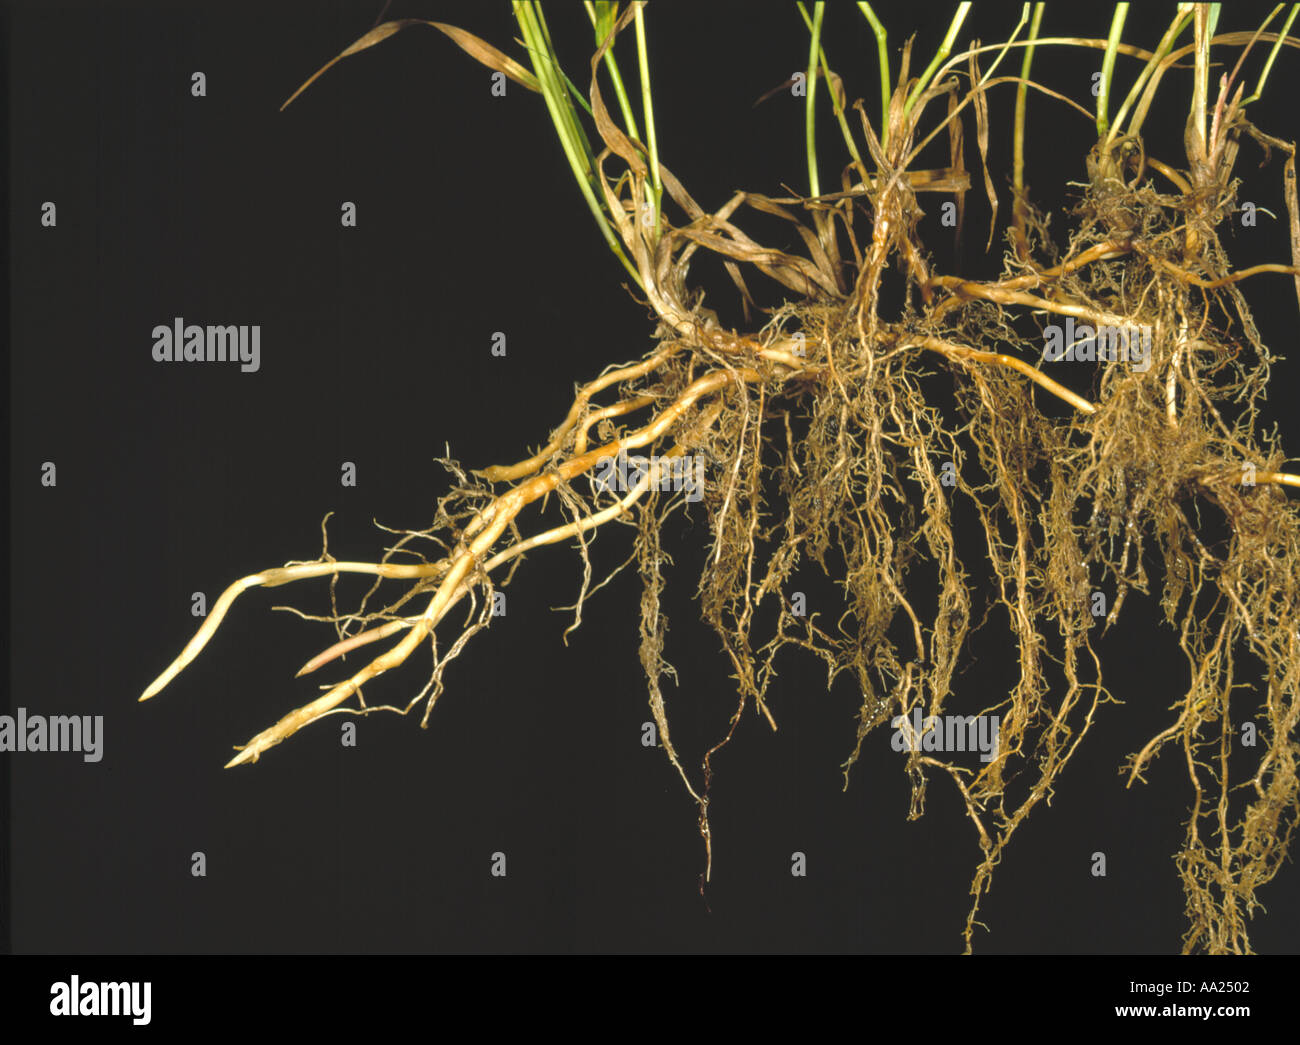 Couch grass Agropyron repens creeping rhizomes of this serious grass weed Stock Photo